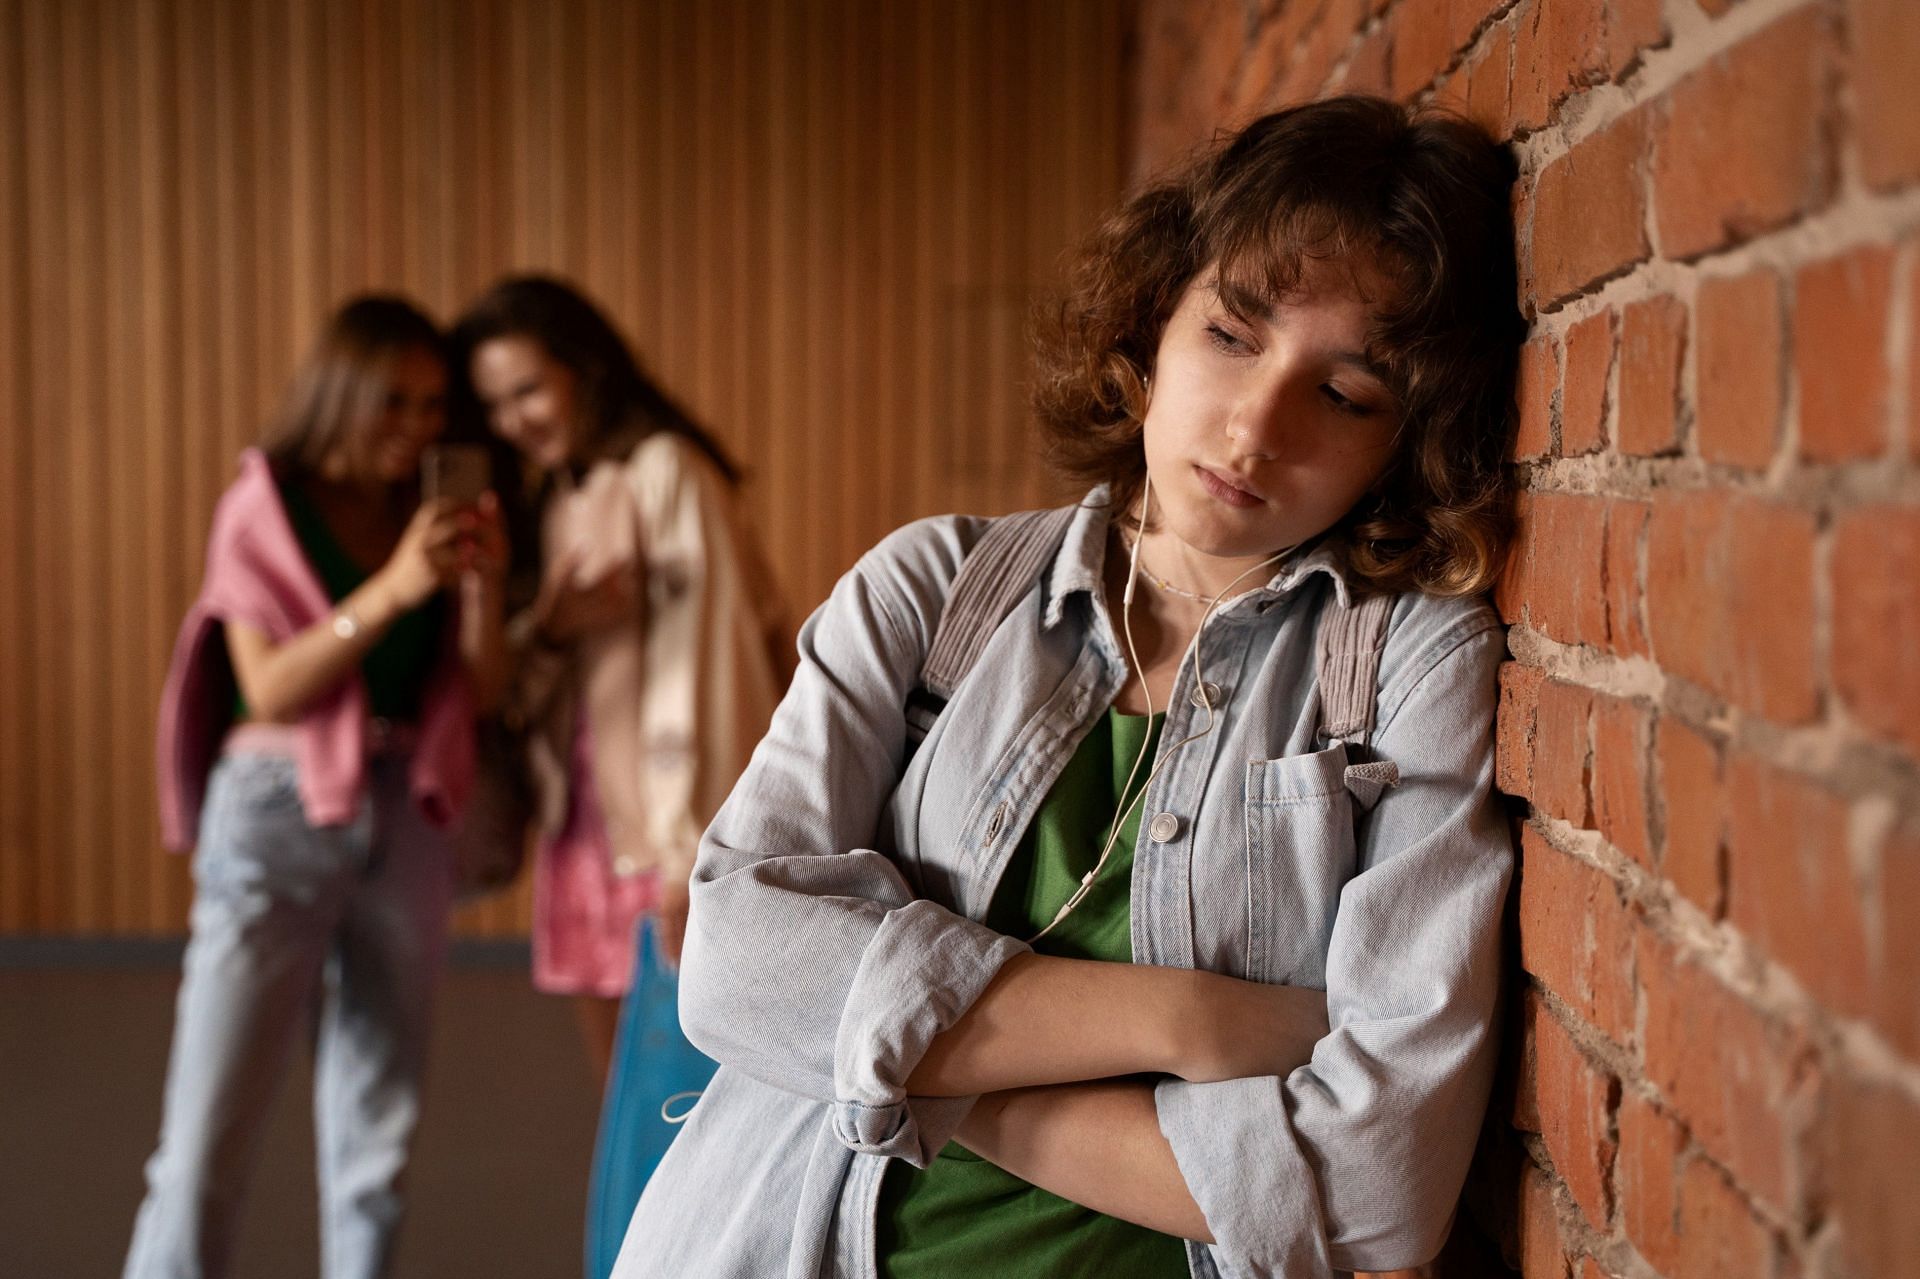 Behavioral changes are common with SUD or Substance Use Disorder. (Image via Freepik/ freepik)